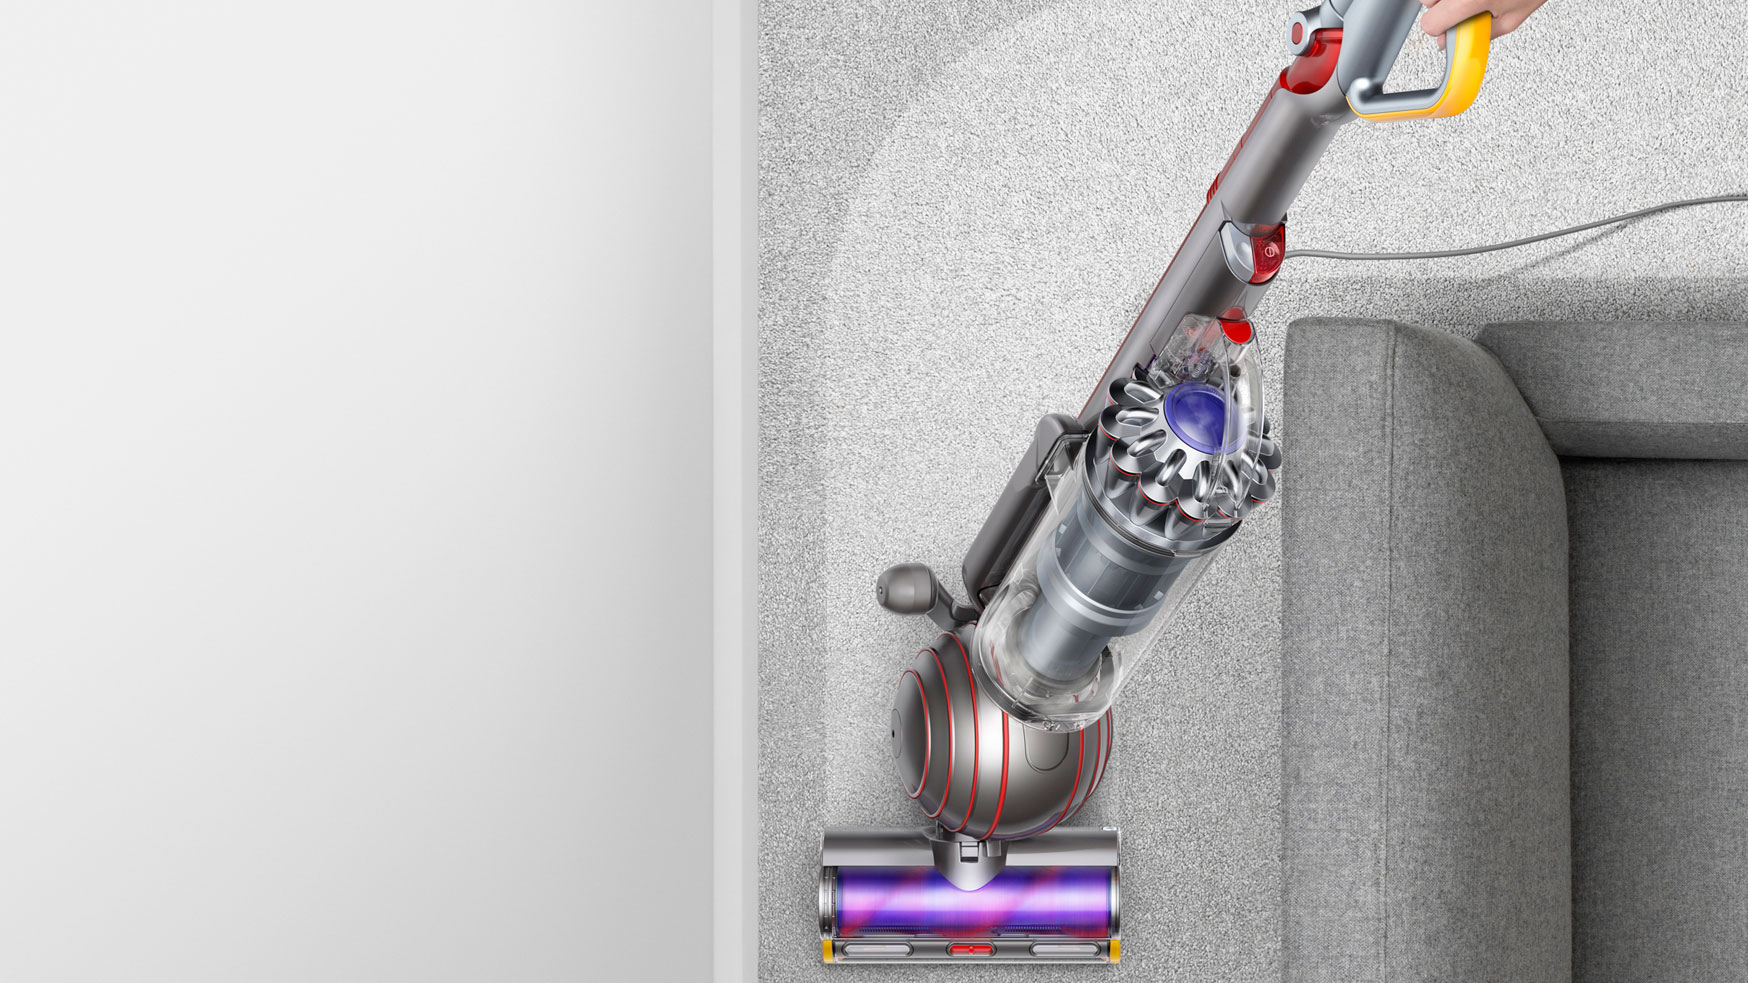 Dyson Ball Animal 2 review